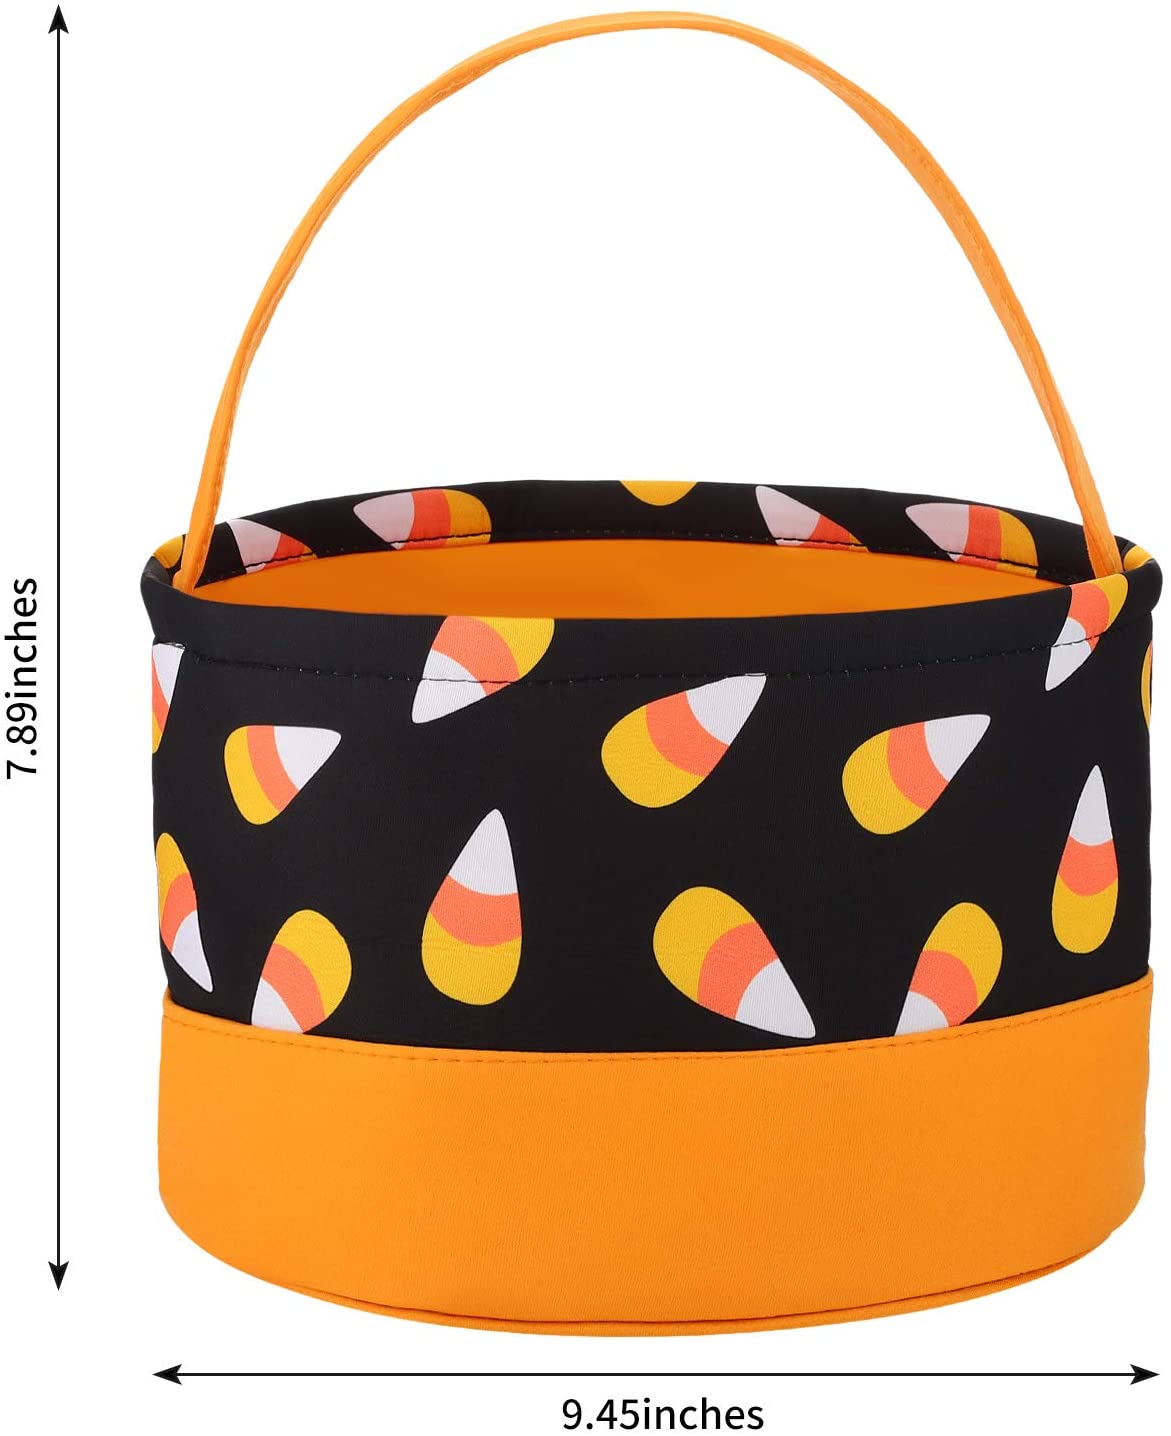 LEZMORE Halloween Trick or Treat Bags Halloween Candy Buckets Tote Bags Orange Black with Candy Corn Halloween Party Favor Bags for Halloween Supplies - image 3 of 7